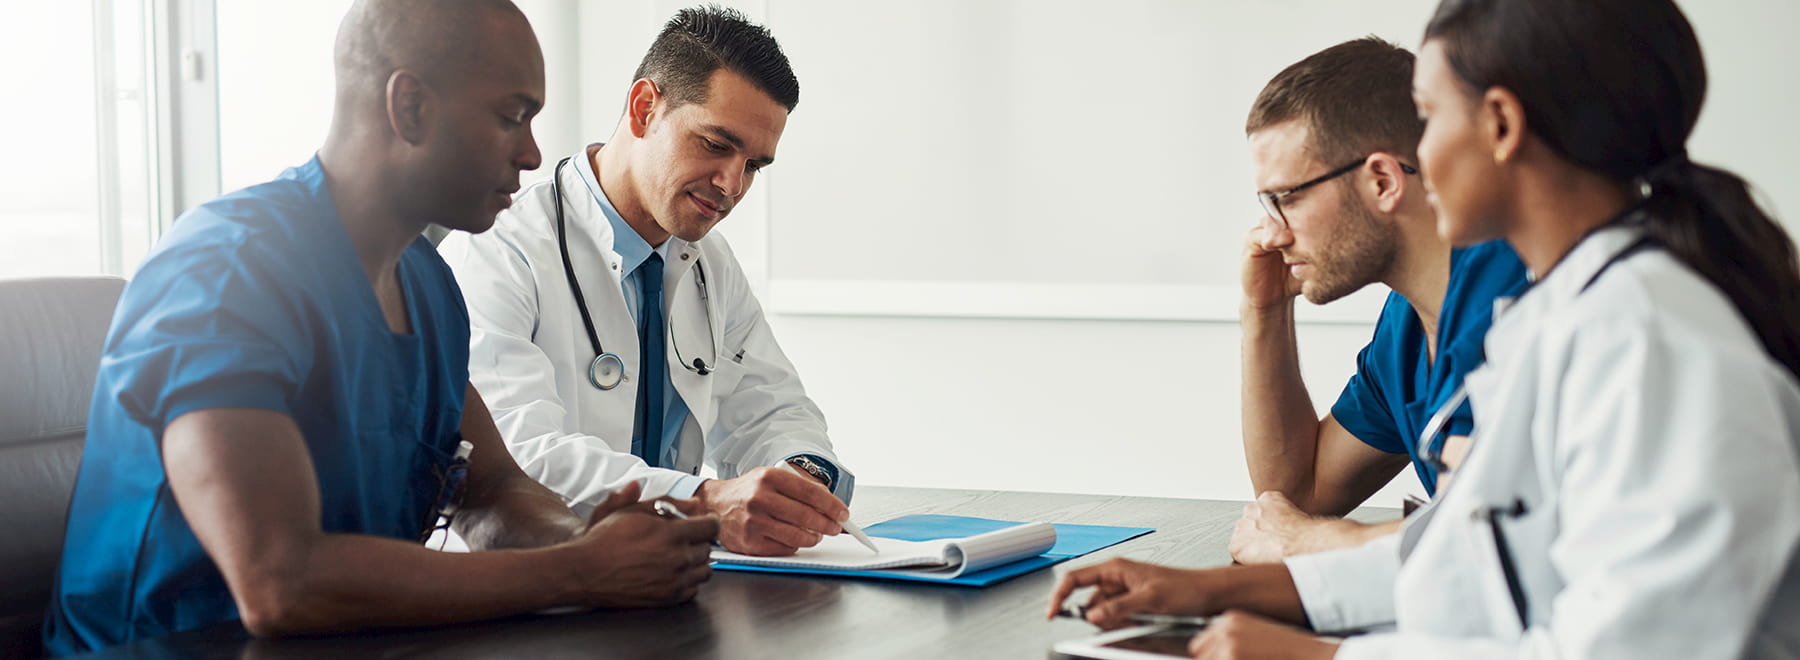 Group of doctors reviewing paperwork